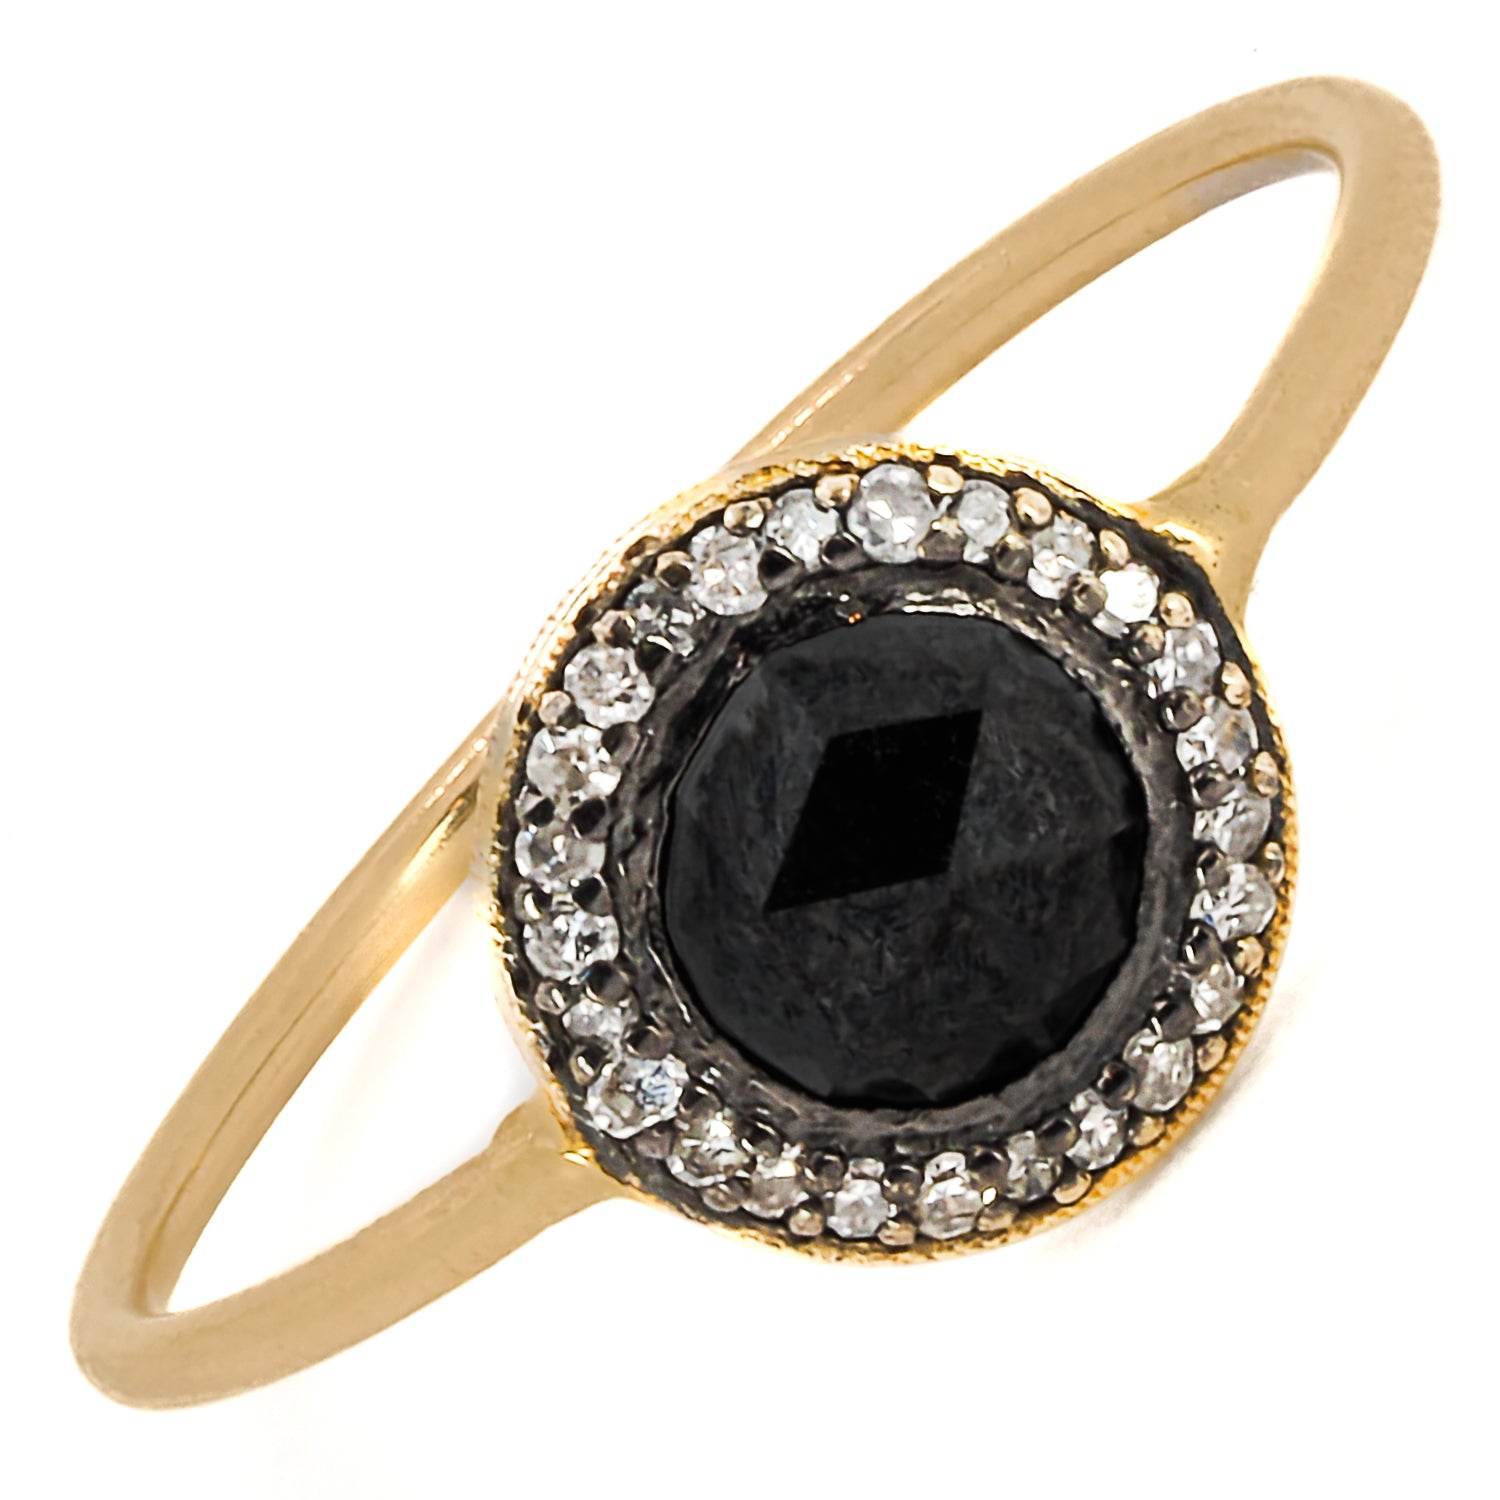 Delicate and luxurious, the Mini Black Rose Cut Ring is a timeless piece of jewelry.